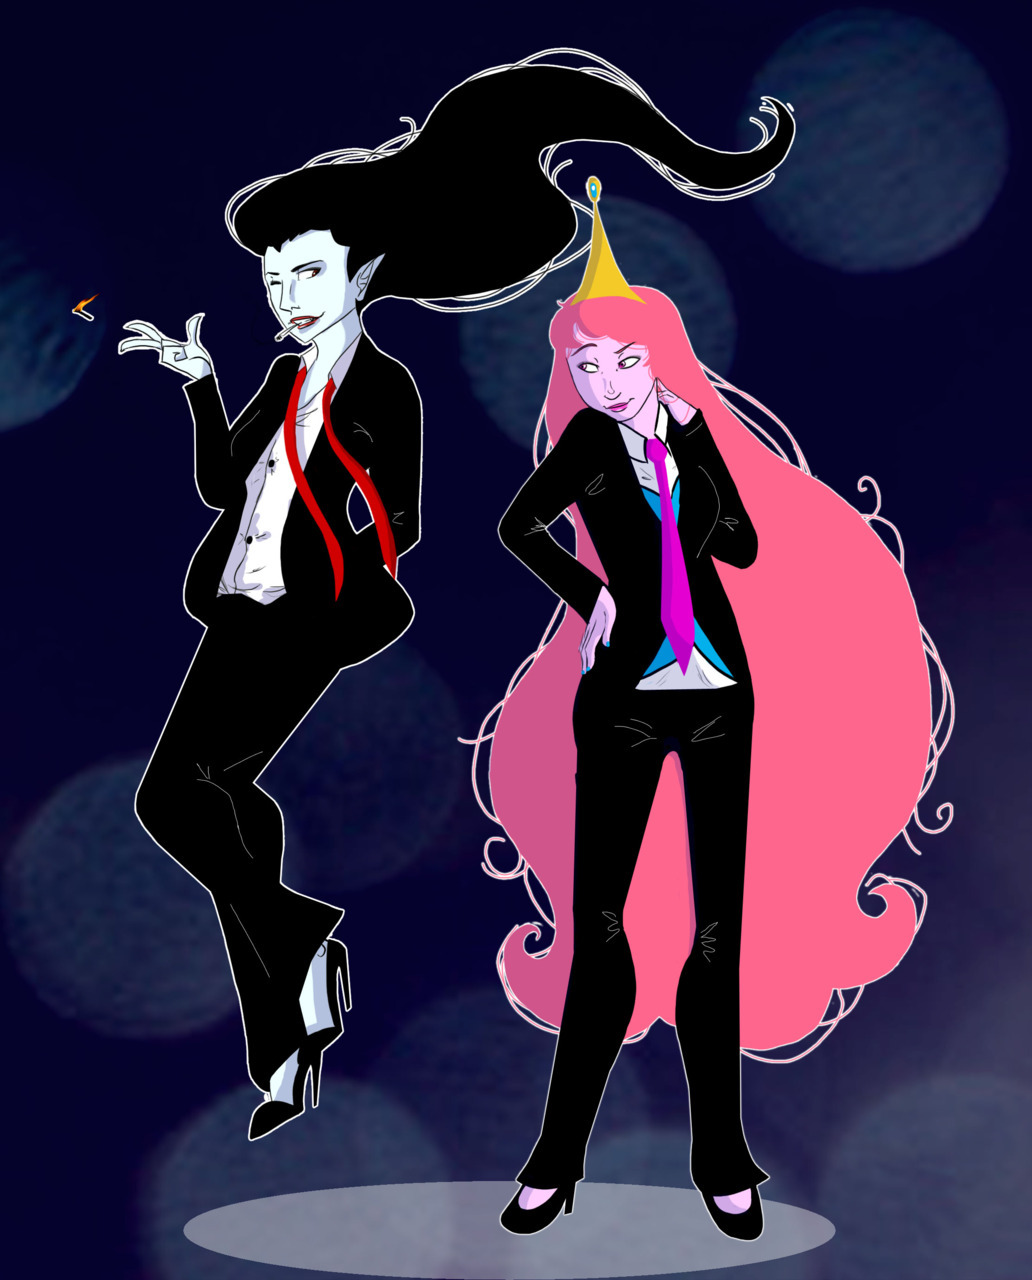 mocha-bear:  I just REALLY wanted to draw Marcy and Peebles in suits. Lol background?